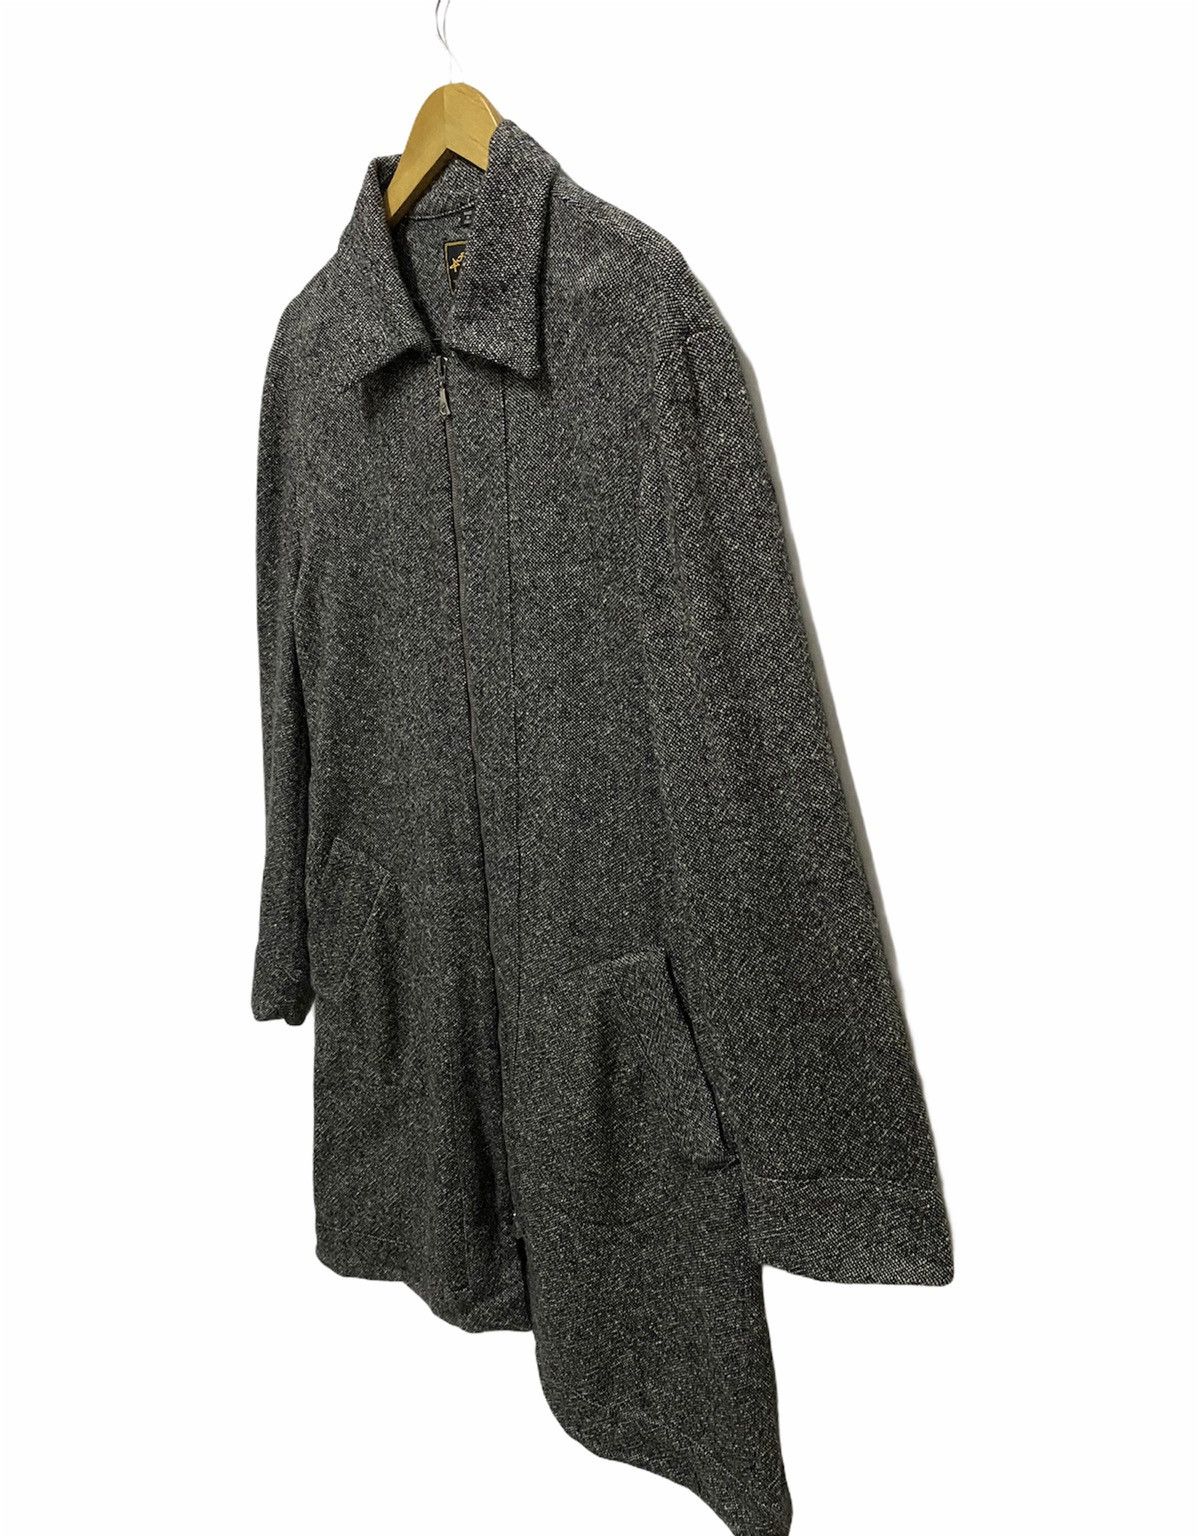 Vivienne Westwood Anglomania Wool Long Jacket Made in Italy - 4